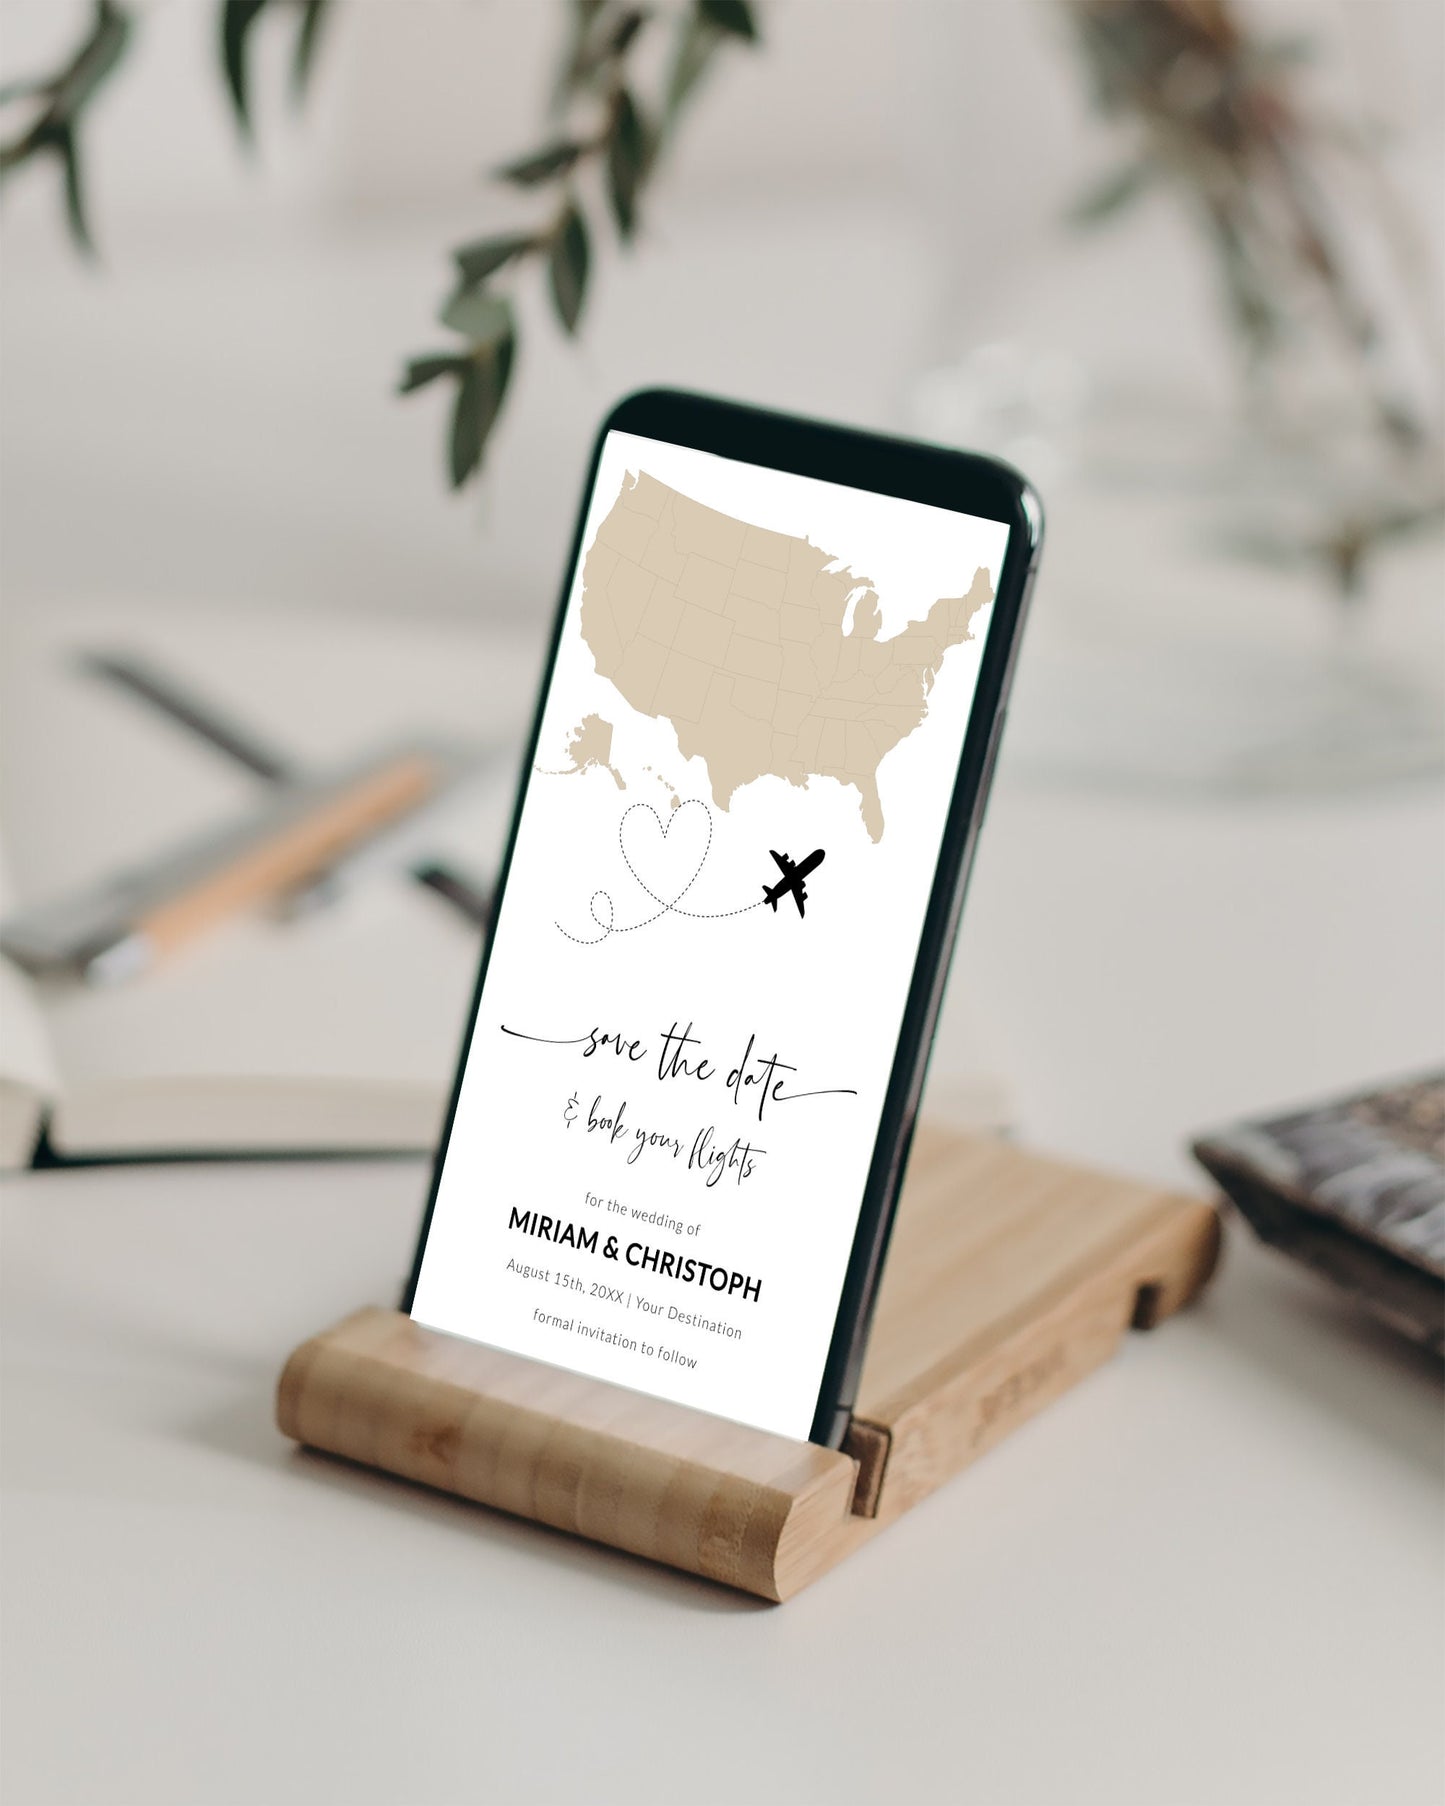 Save the date Destination wedding mobile invitation template to send via text on phone USA Map #072w